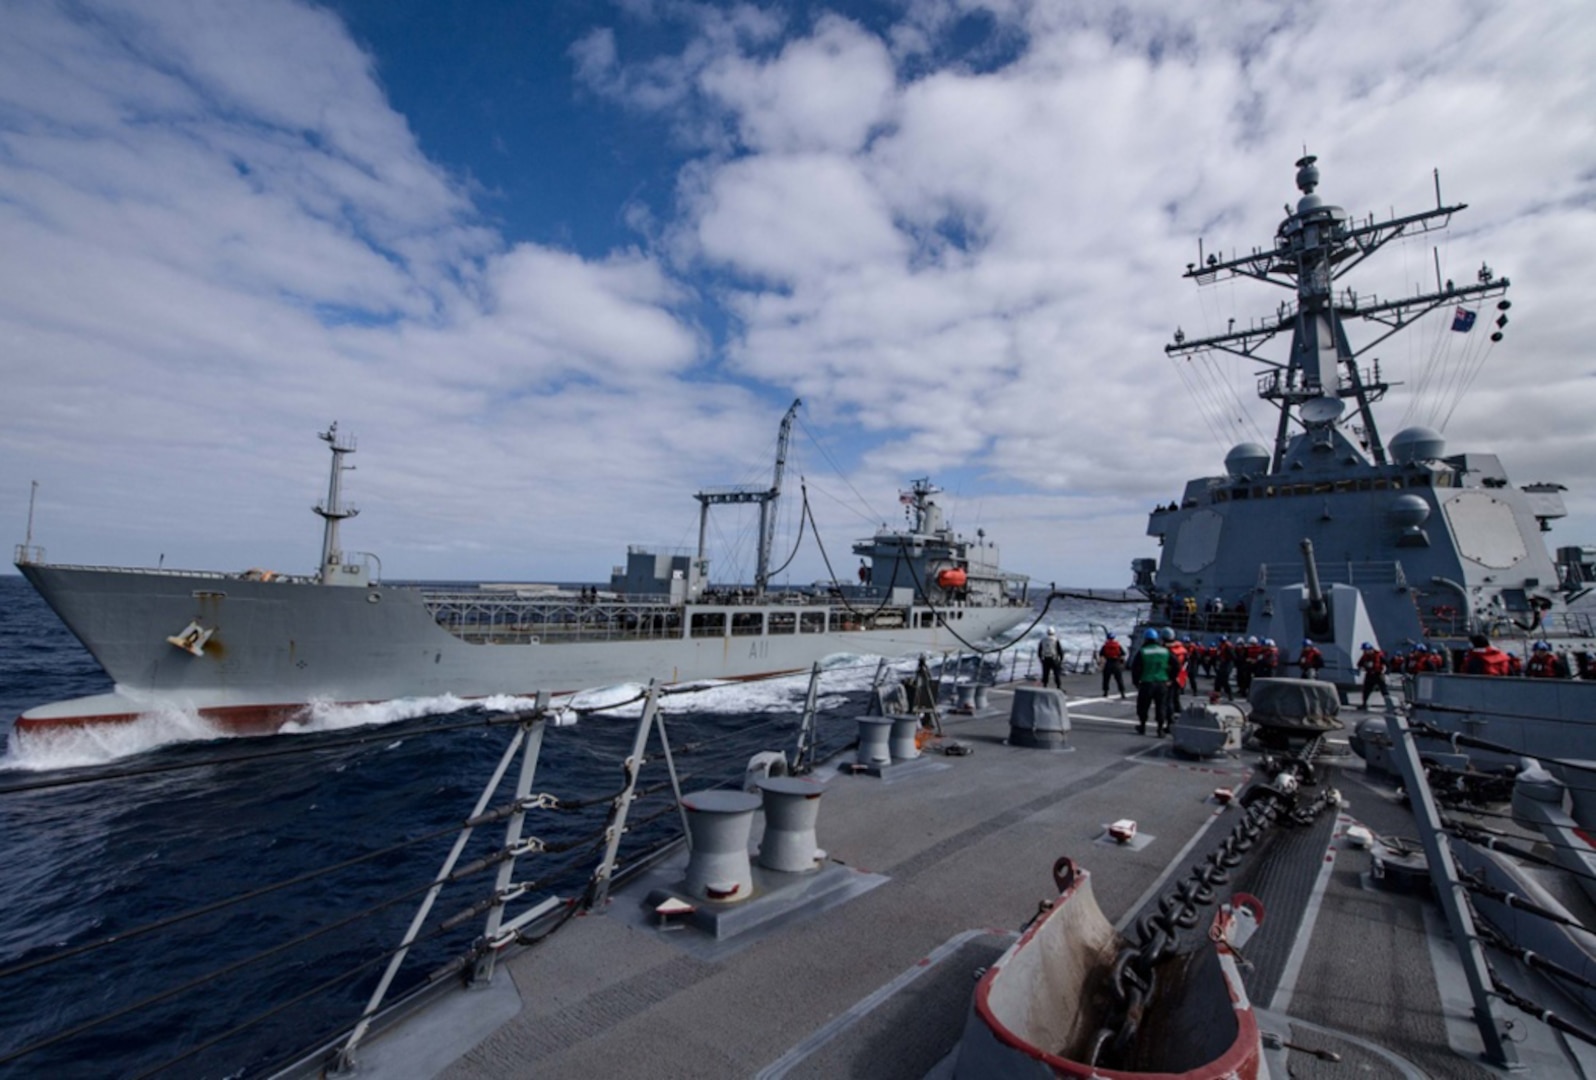 Arleigh Burke-class guided-missile destroyer USS Sampson (DDG 102), right, conducts a replenishment-at-sea with Her Majesty's New Zealand Ship Endeavour (A11), Nov. 13, 2016. Sampson will report to U.S. Third Fleet, Headquartered in San Diego, while deployed to the Western Pacific as part of the U.S. Pacific Fleet-led initiative to extend the command and control functions of Third Fleet into the region.